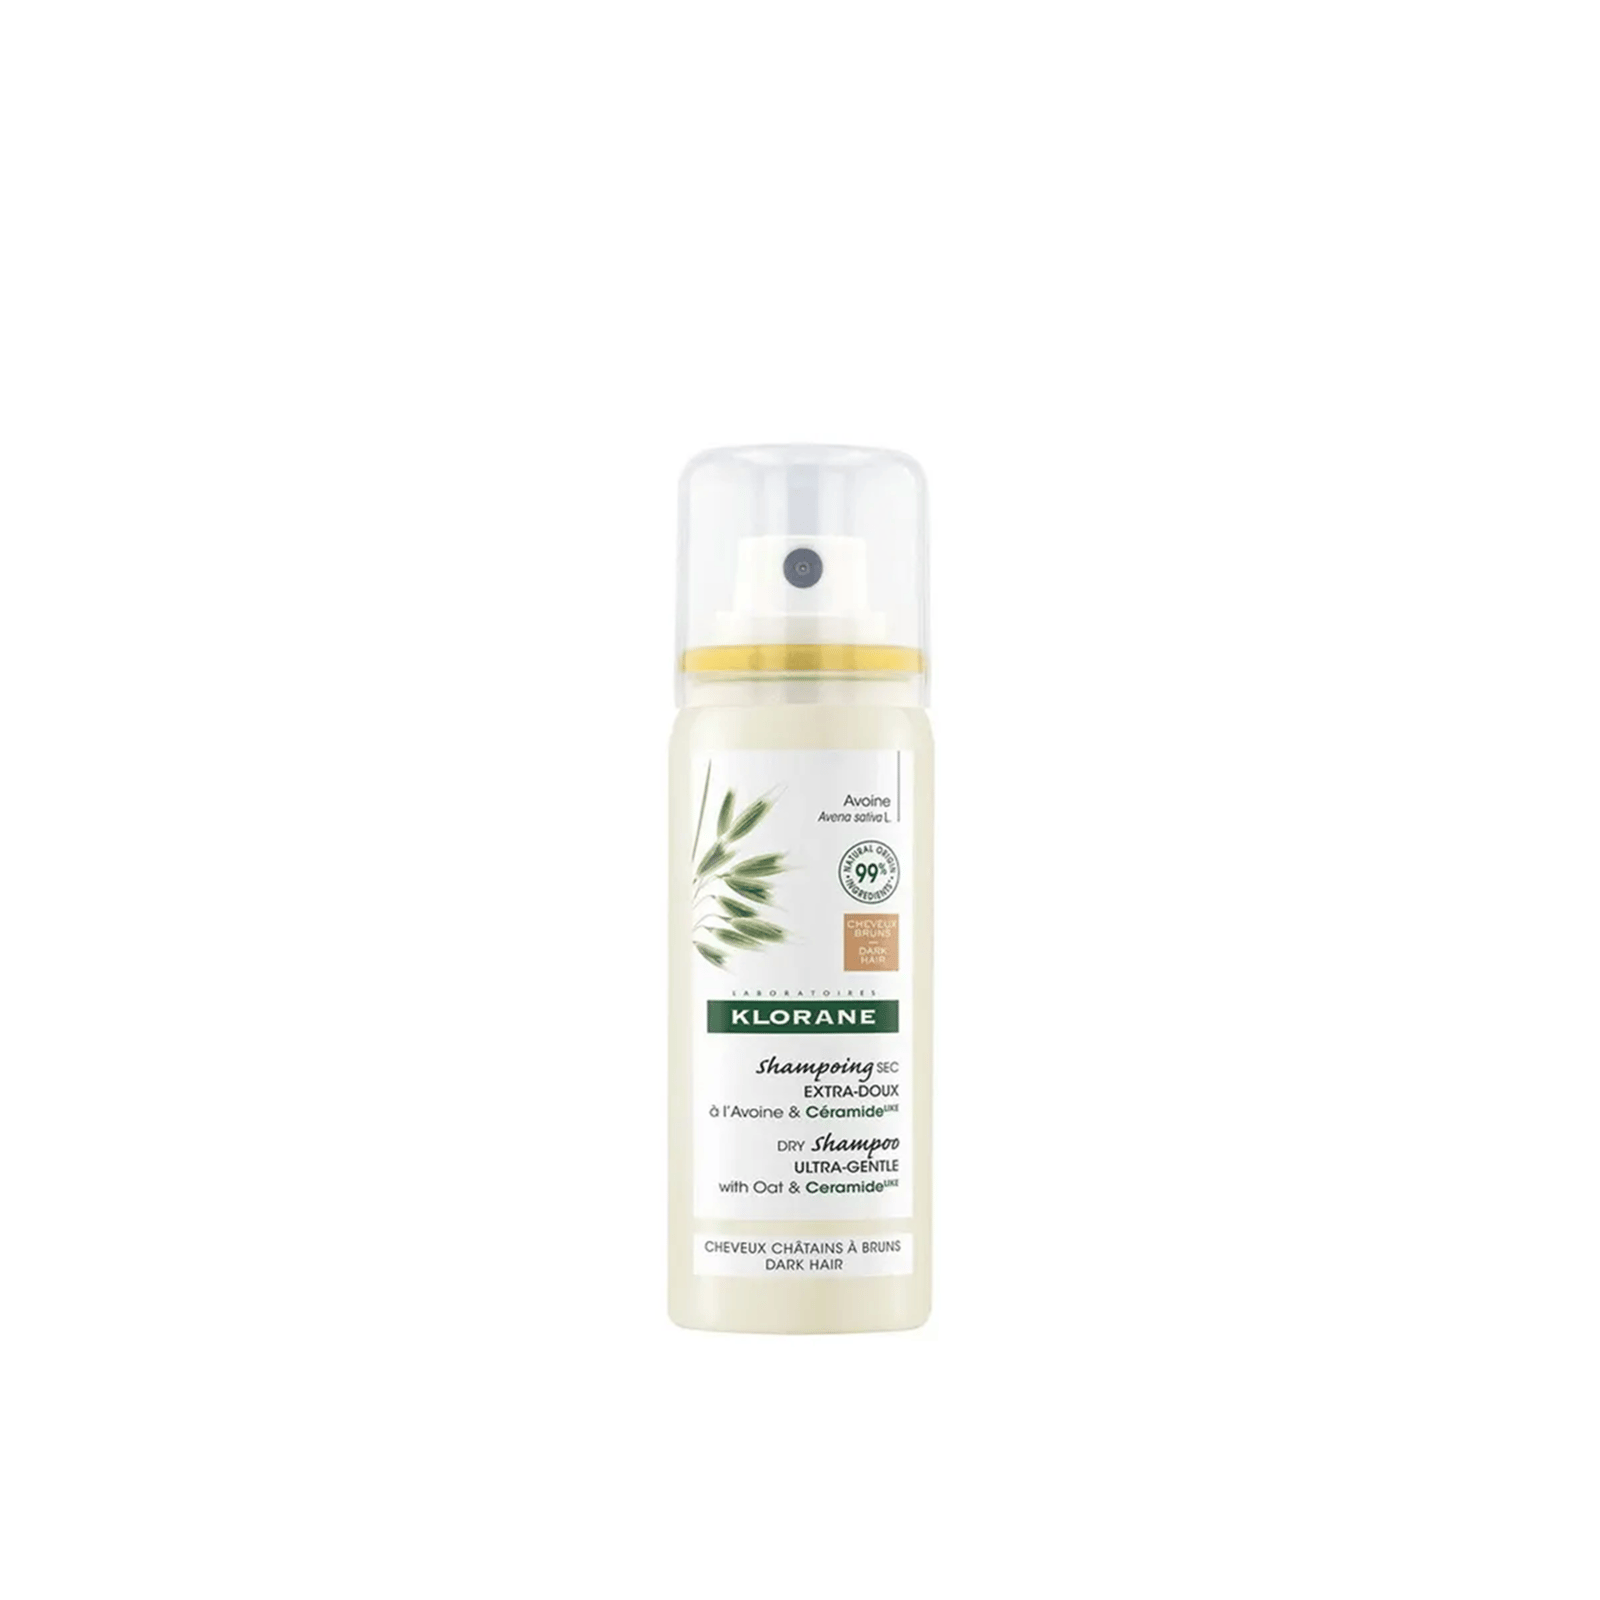 Klorane Dry Shampoo Natural Tinted Oat Extract